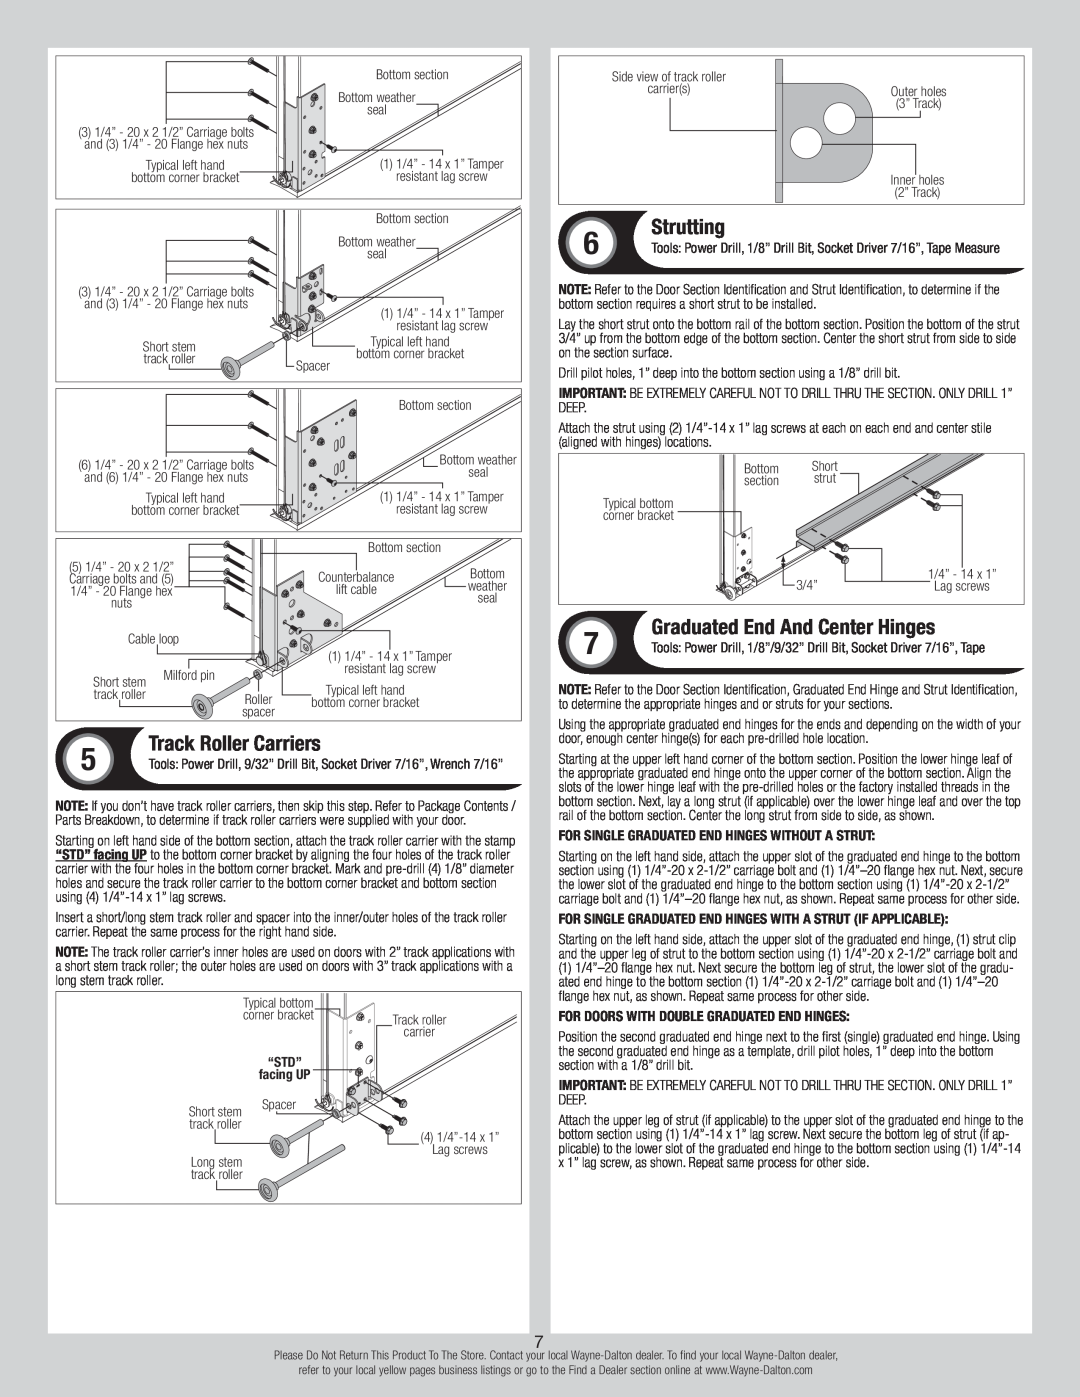 Wayne-Dalton 44 installation instructions Track Roller Carriers, Strutting, Graduated End And Center Hinges 